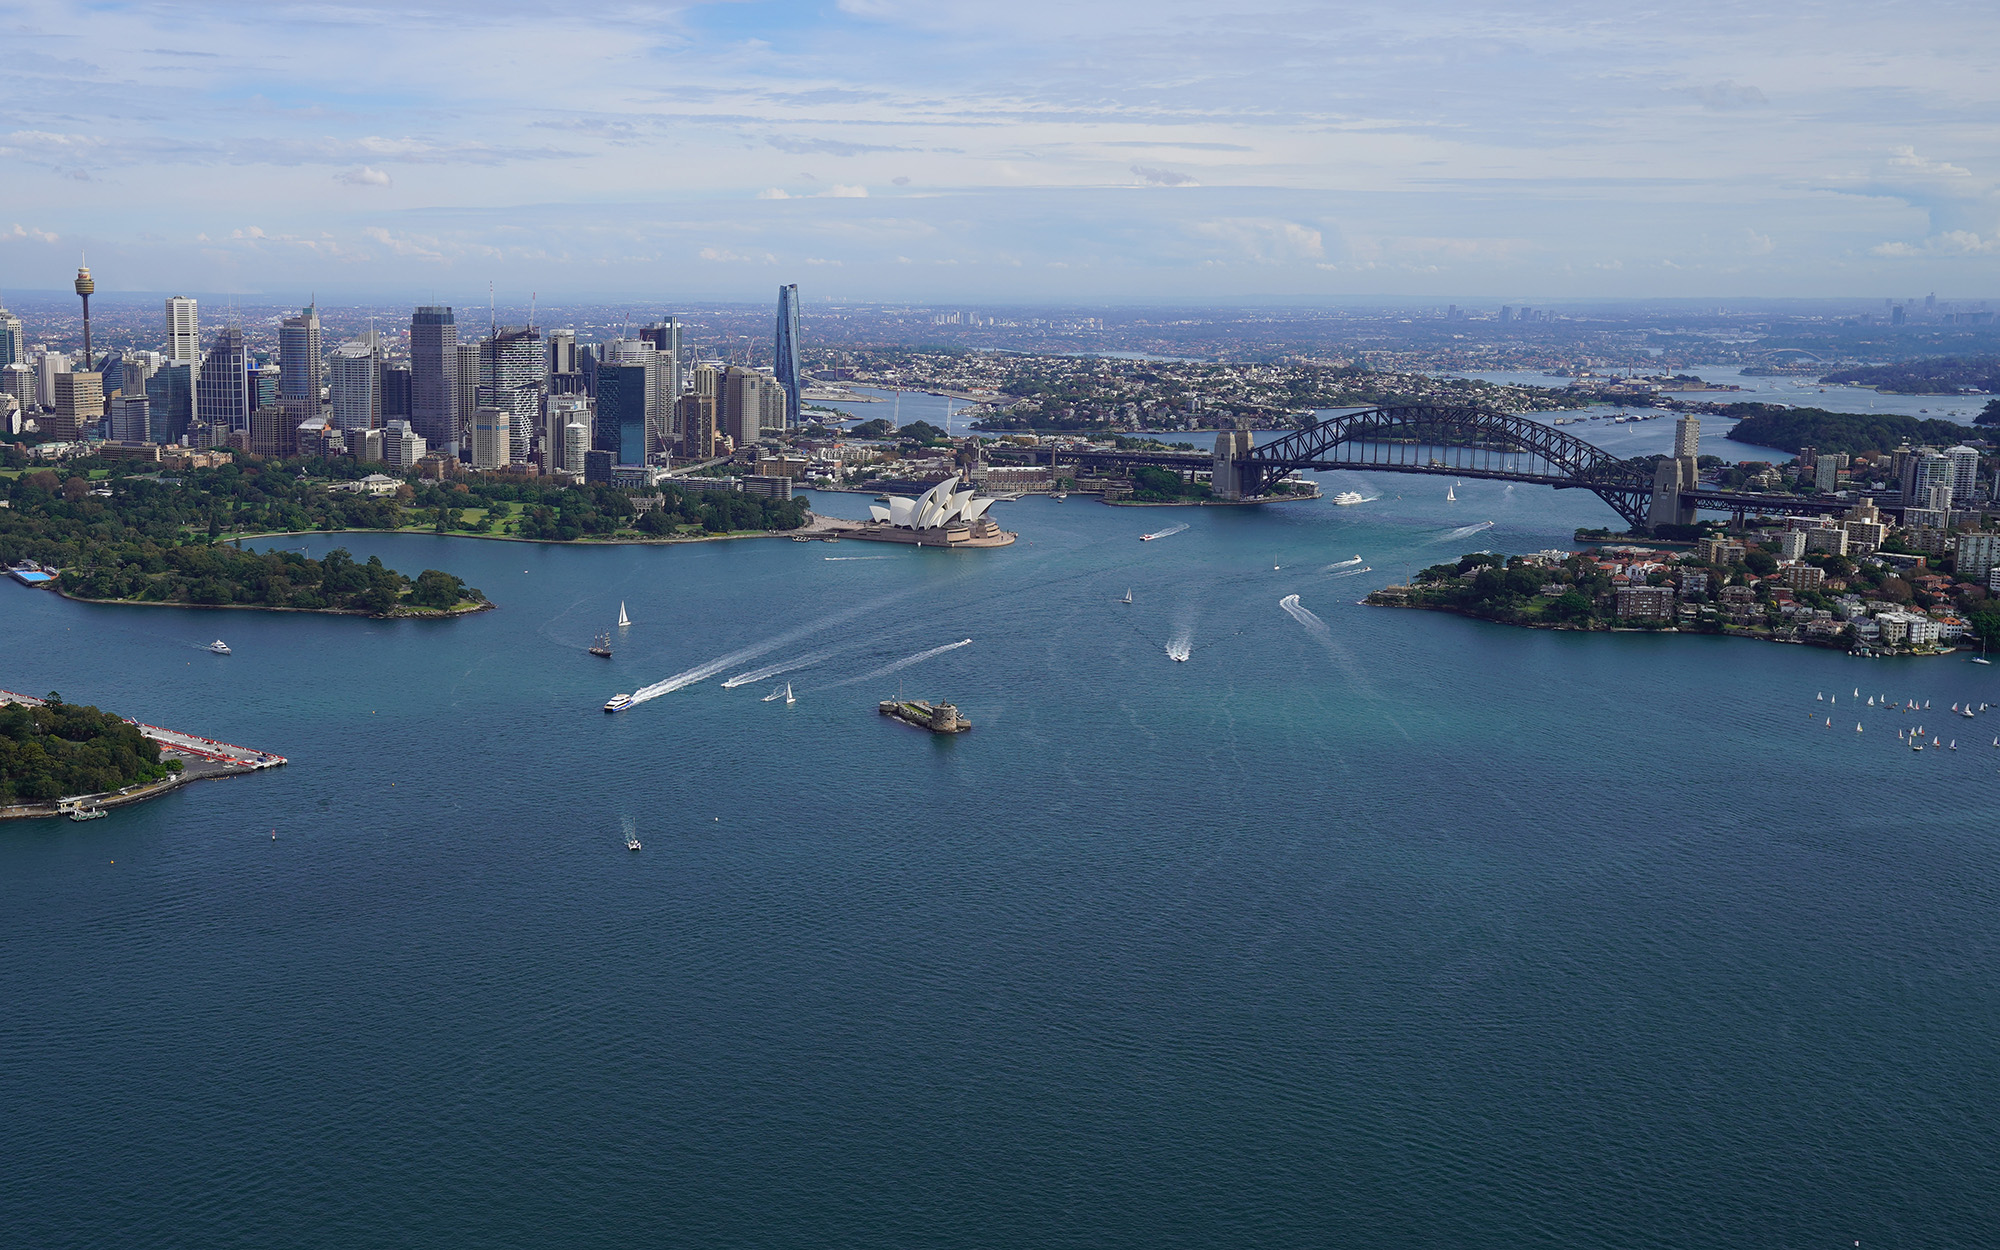 Elevated aerial view over Sydney Harbour from across Mosman and lower north shore suburbs towards city CBD landmarks and waterfront.